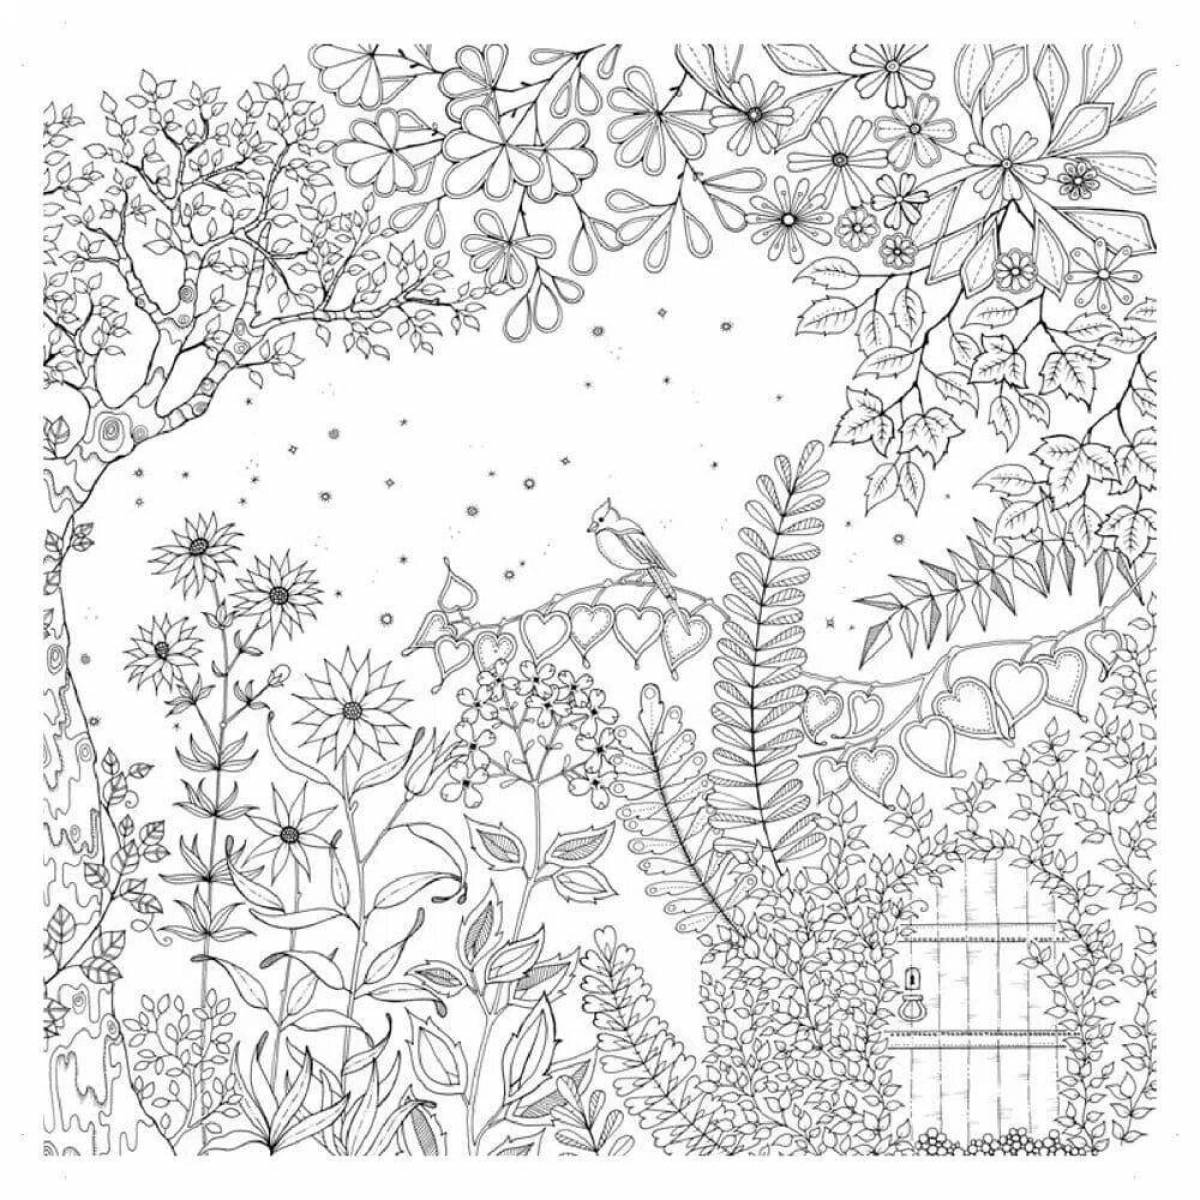 Glorious anti-stress forest coloring book